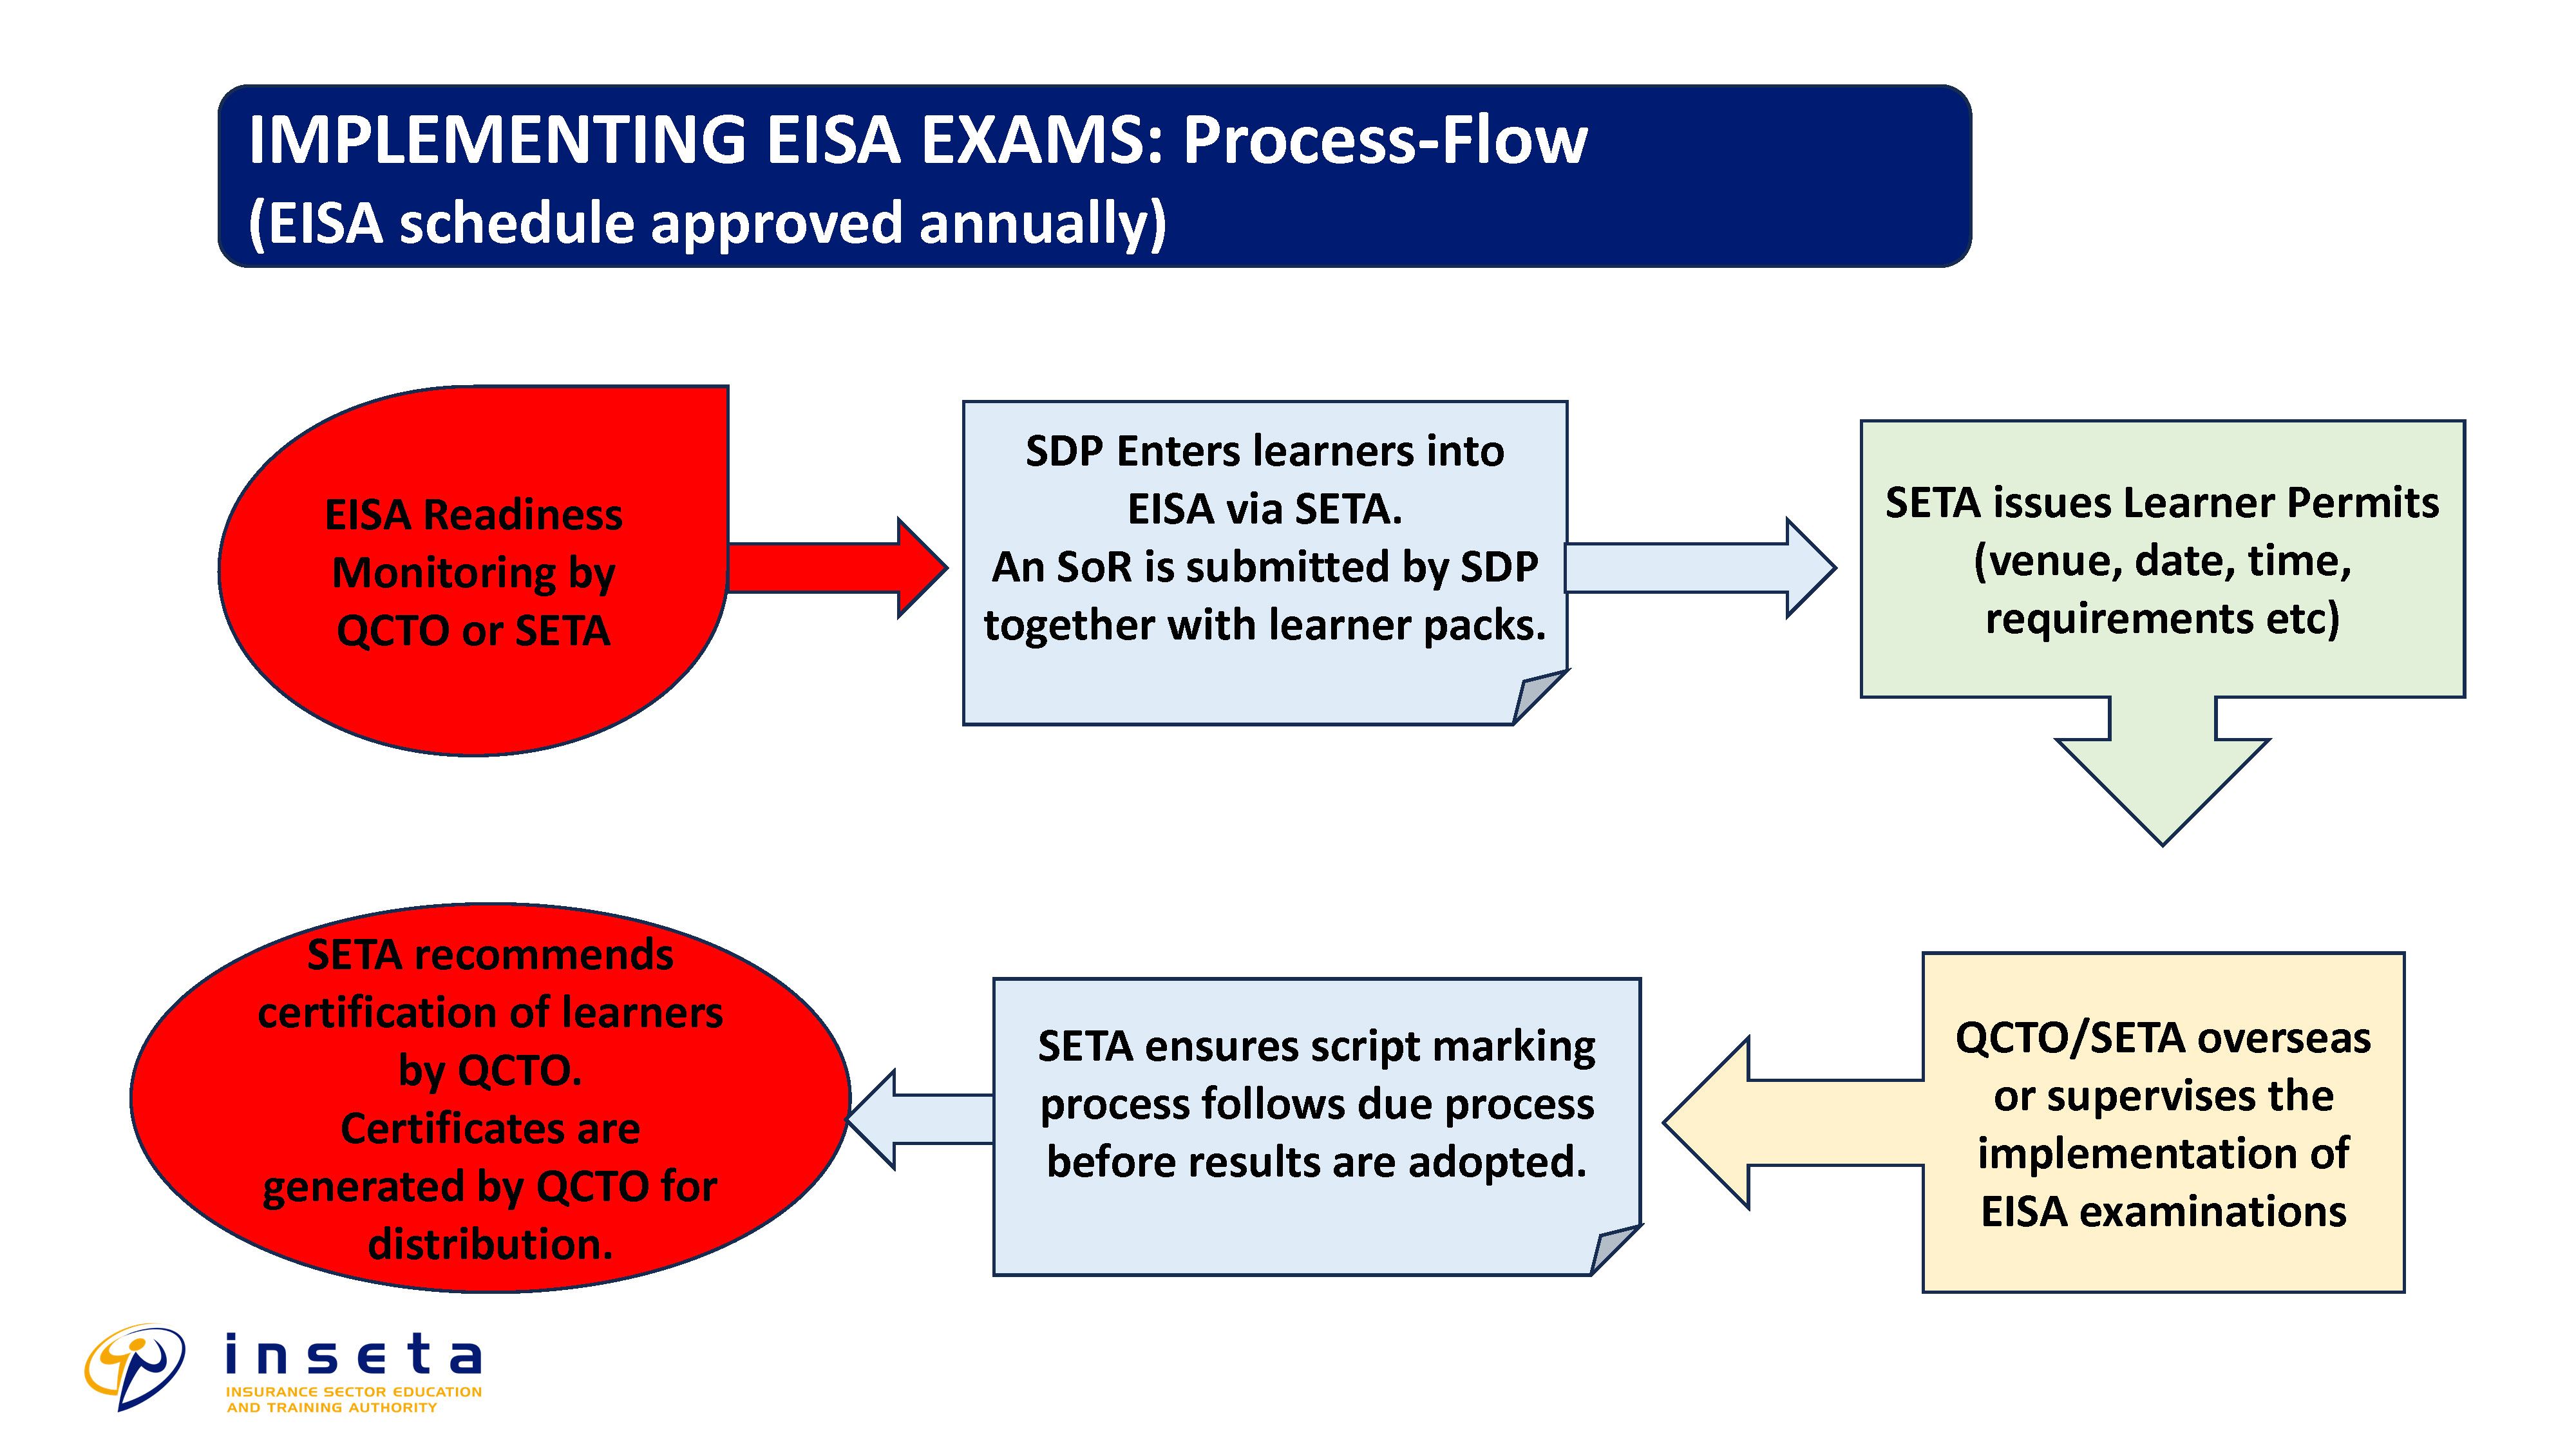 Implementing EISA exams